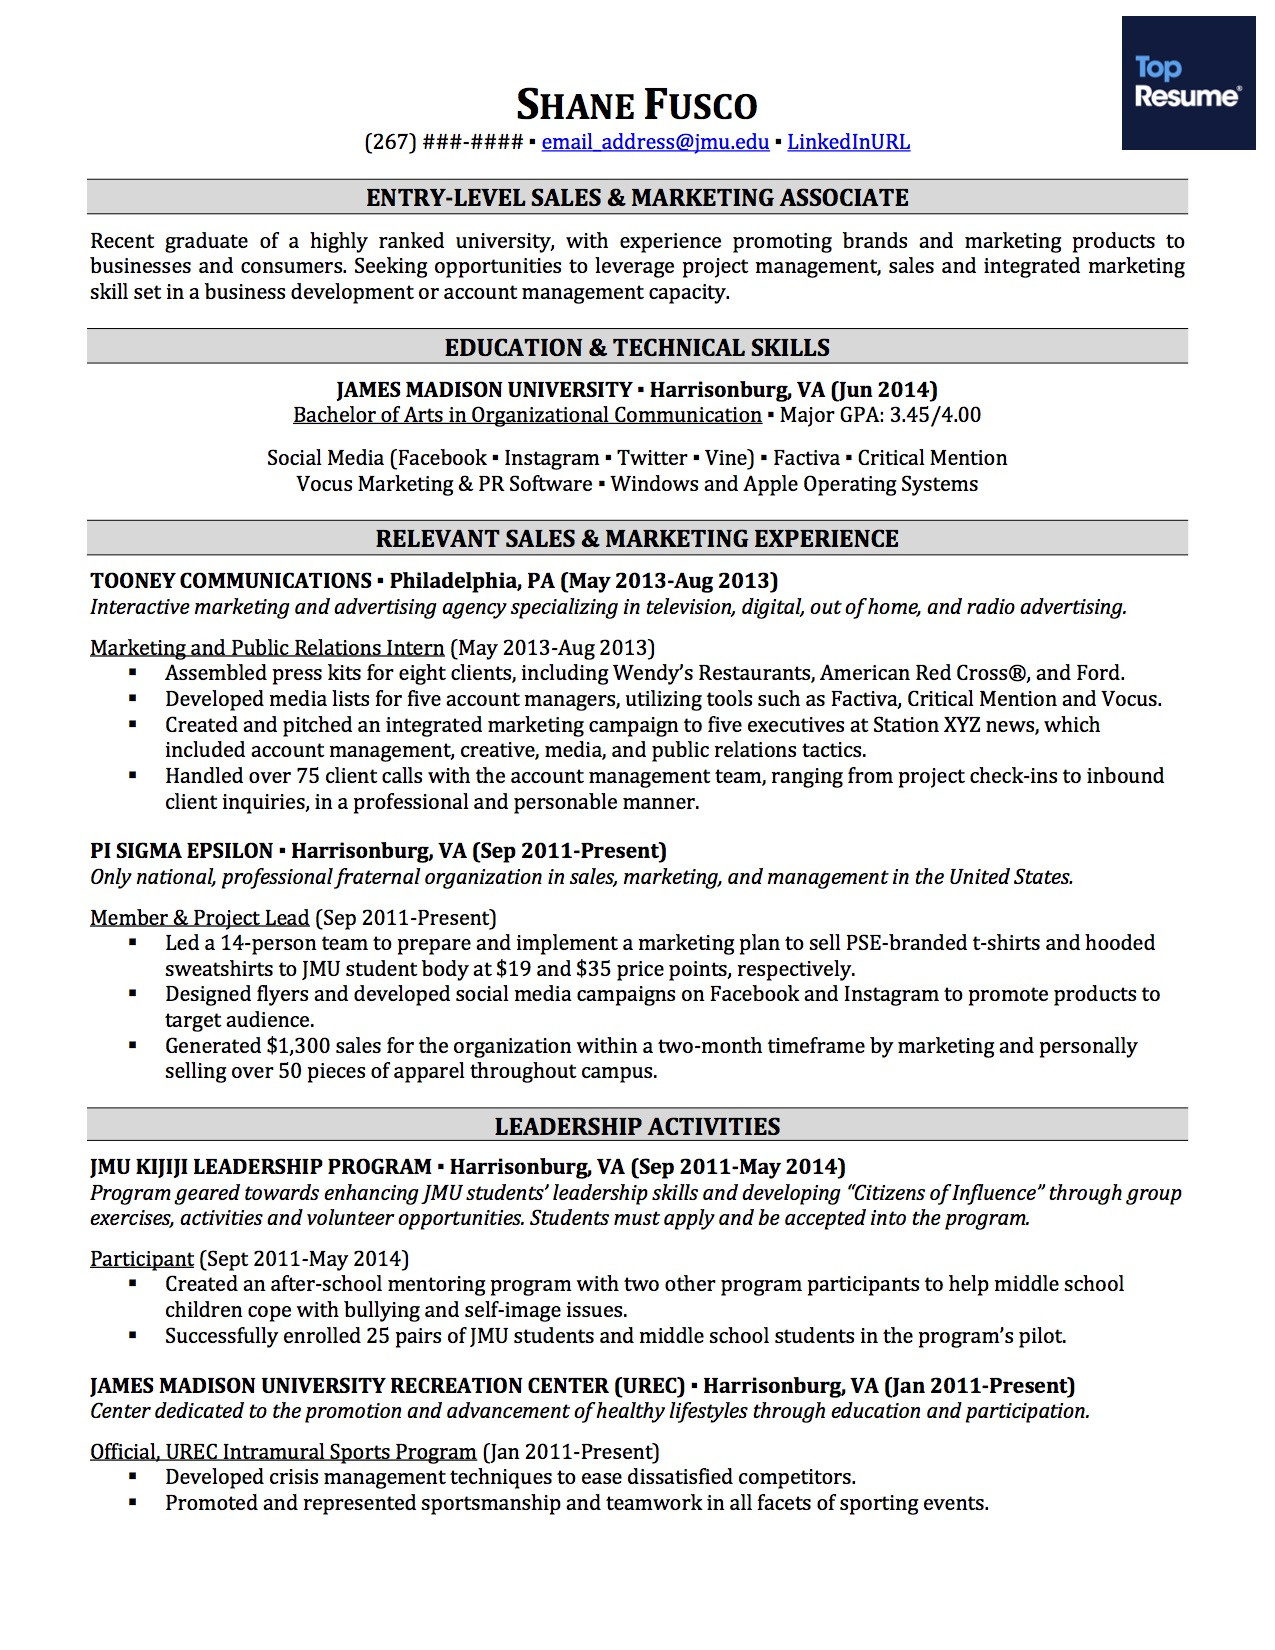 Sample Resume for Not at Of Experience How to Make A Great Resume with No Experience topresume